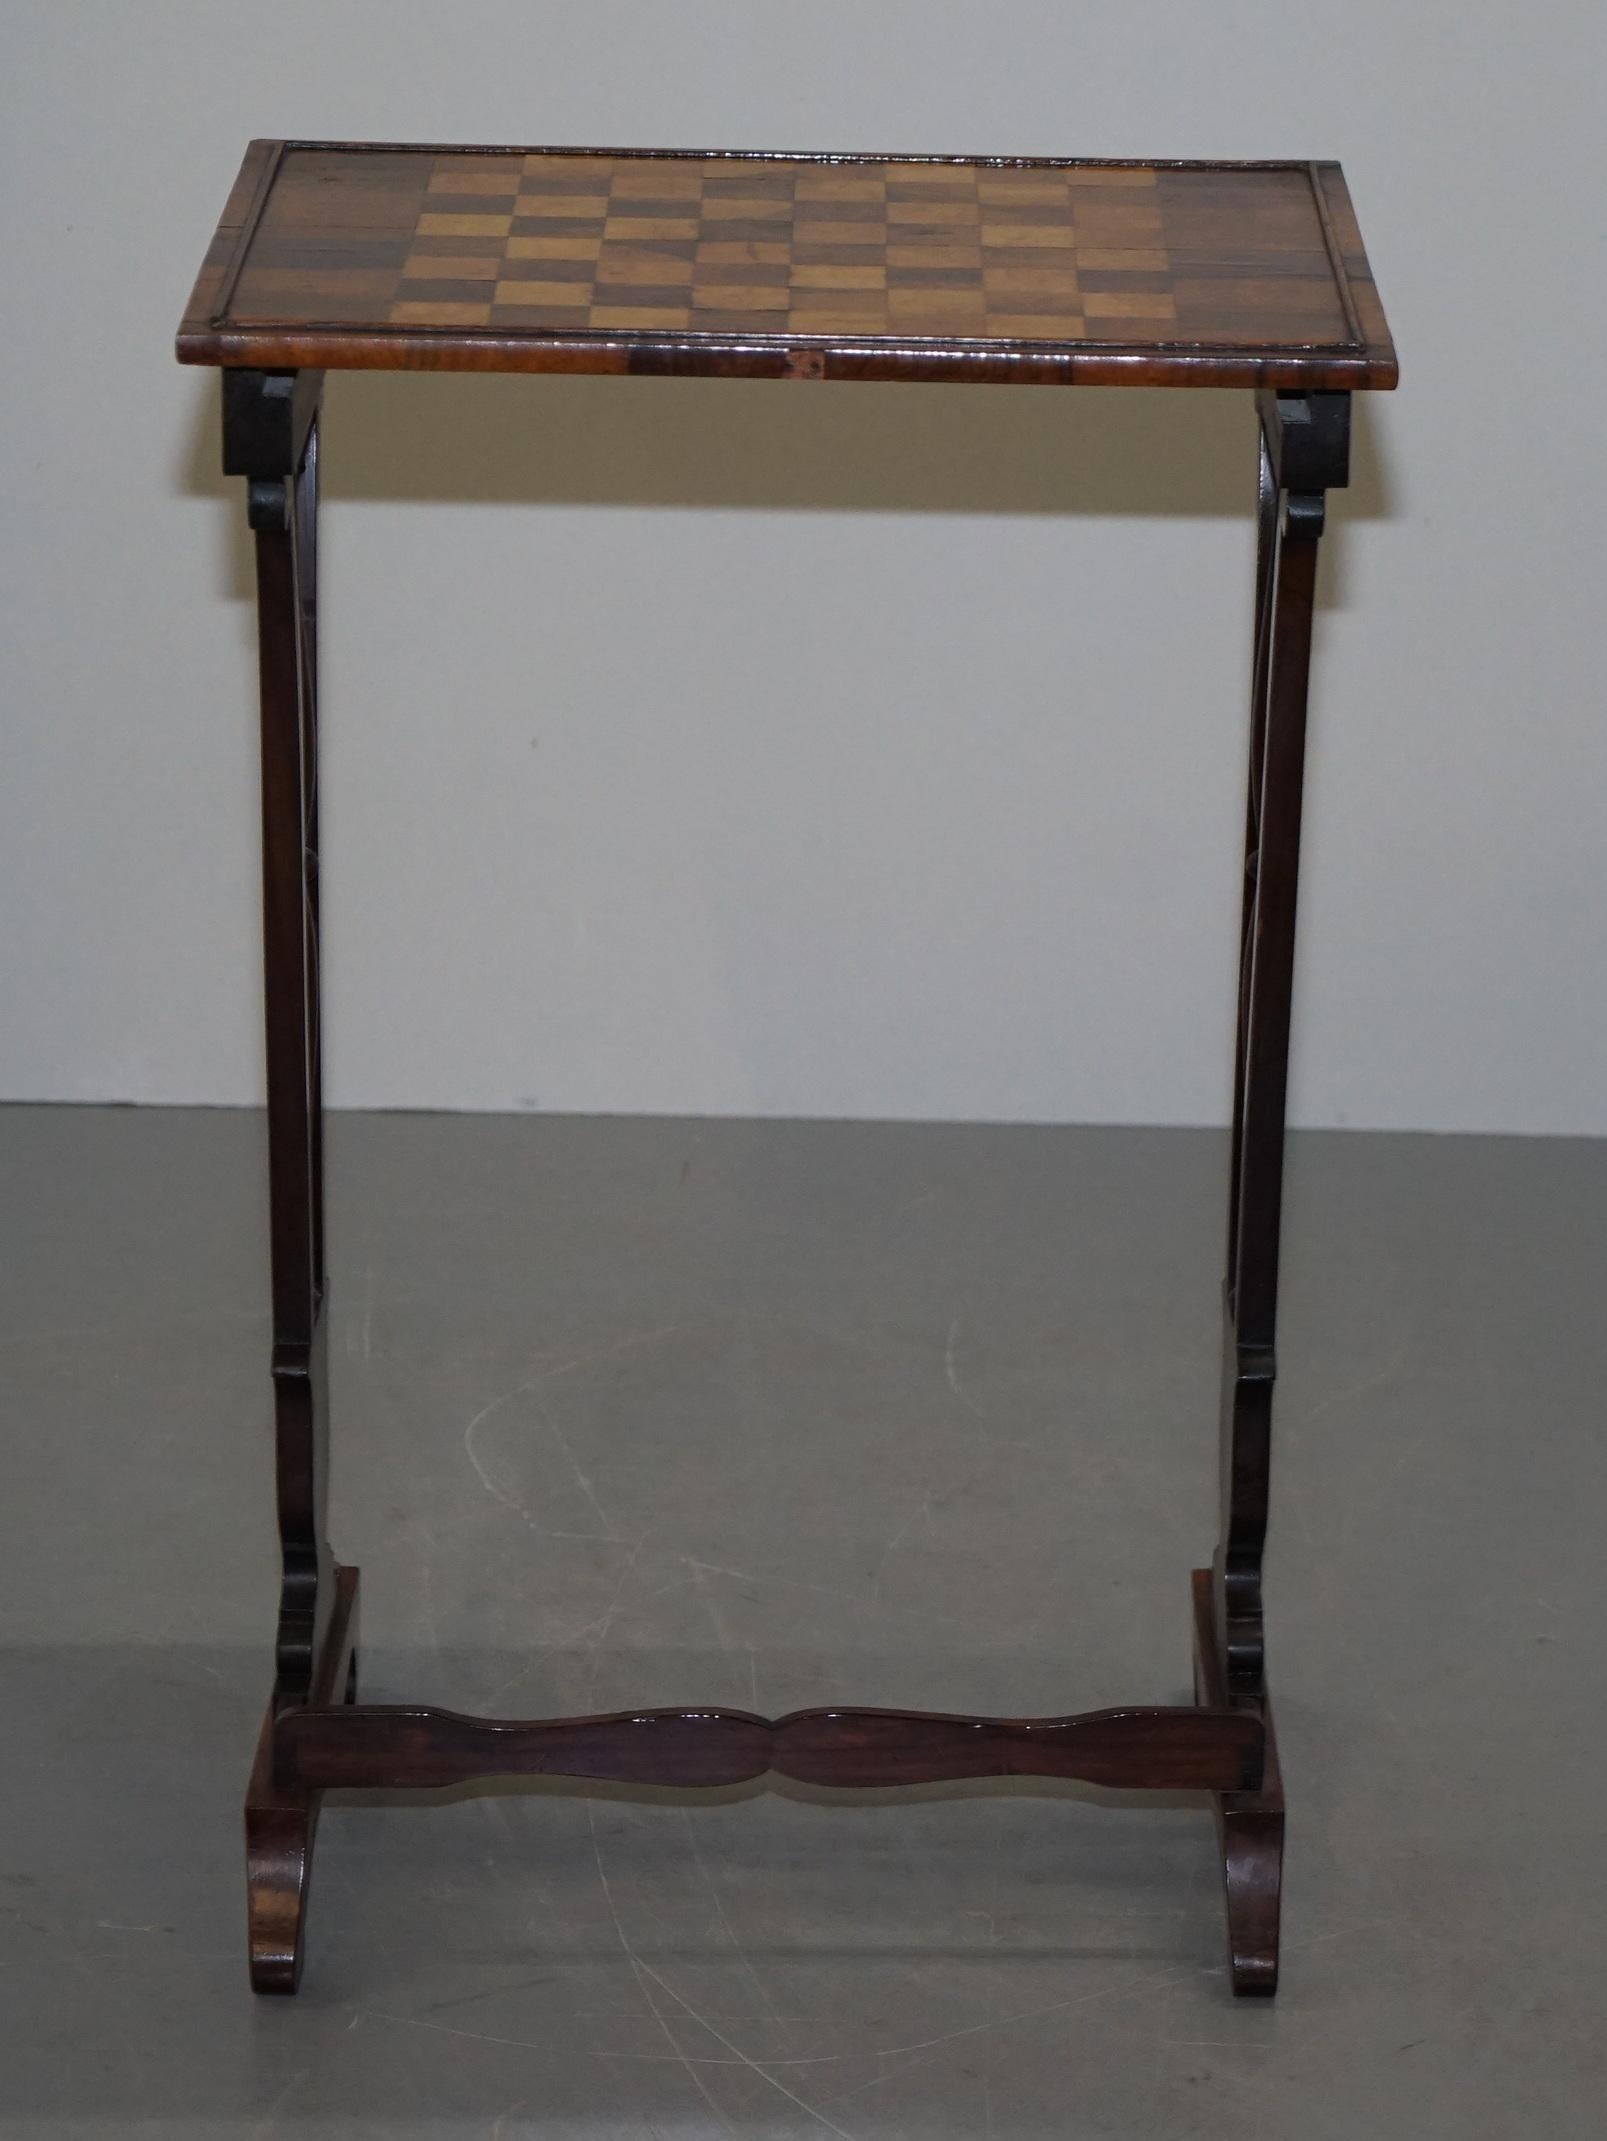 Fine Regency Nest of Hardwood Tables with Chessboard Top Attributed to Gillows For Sale 7